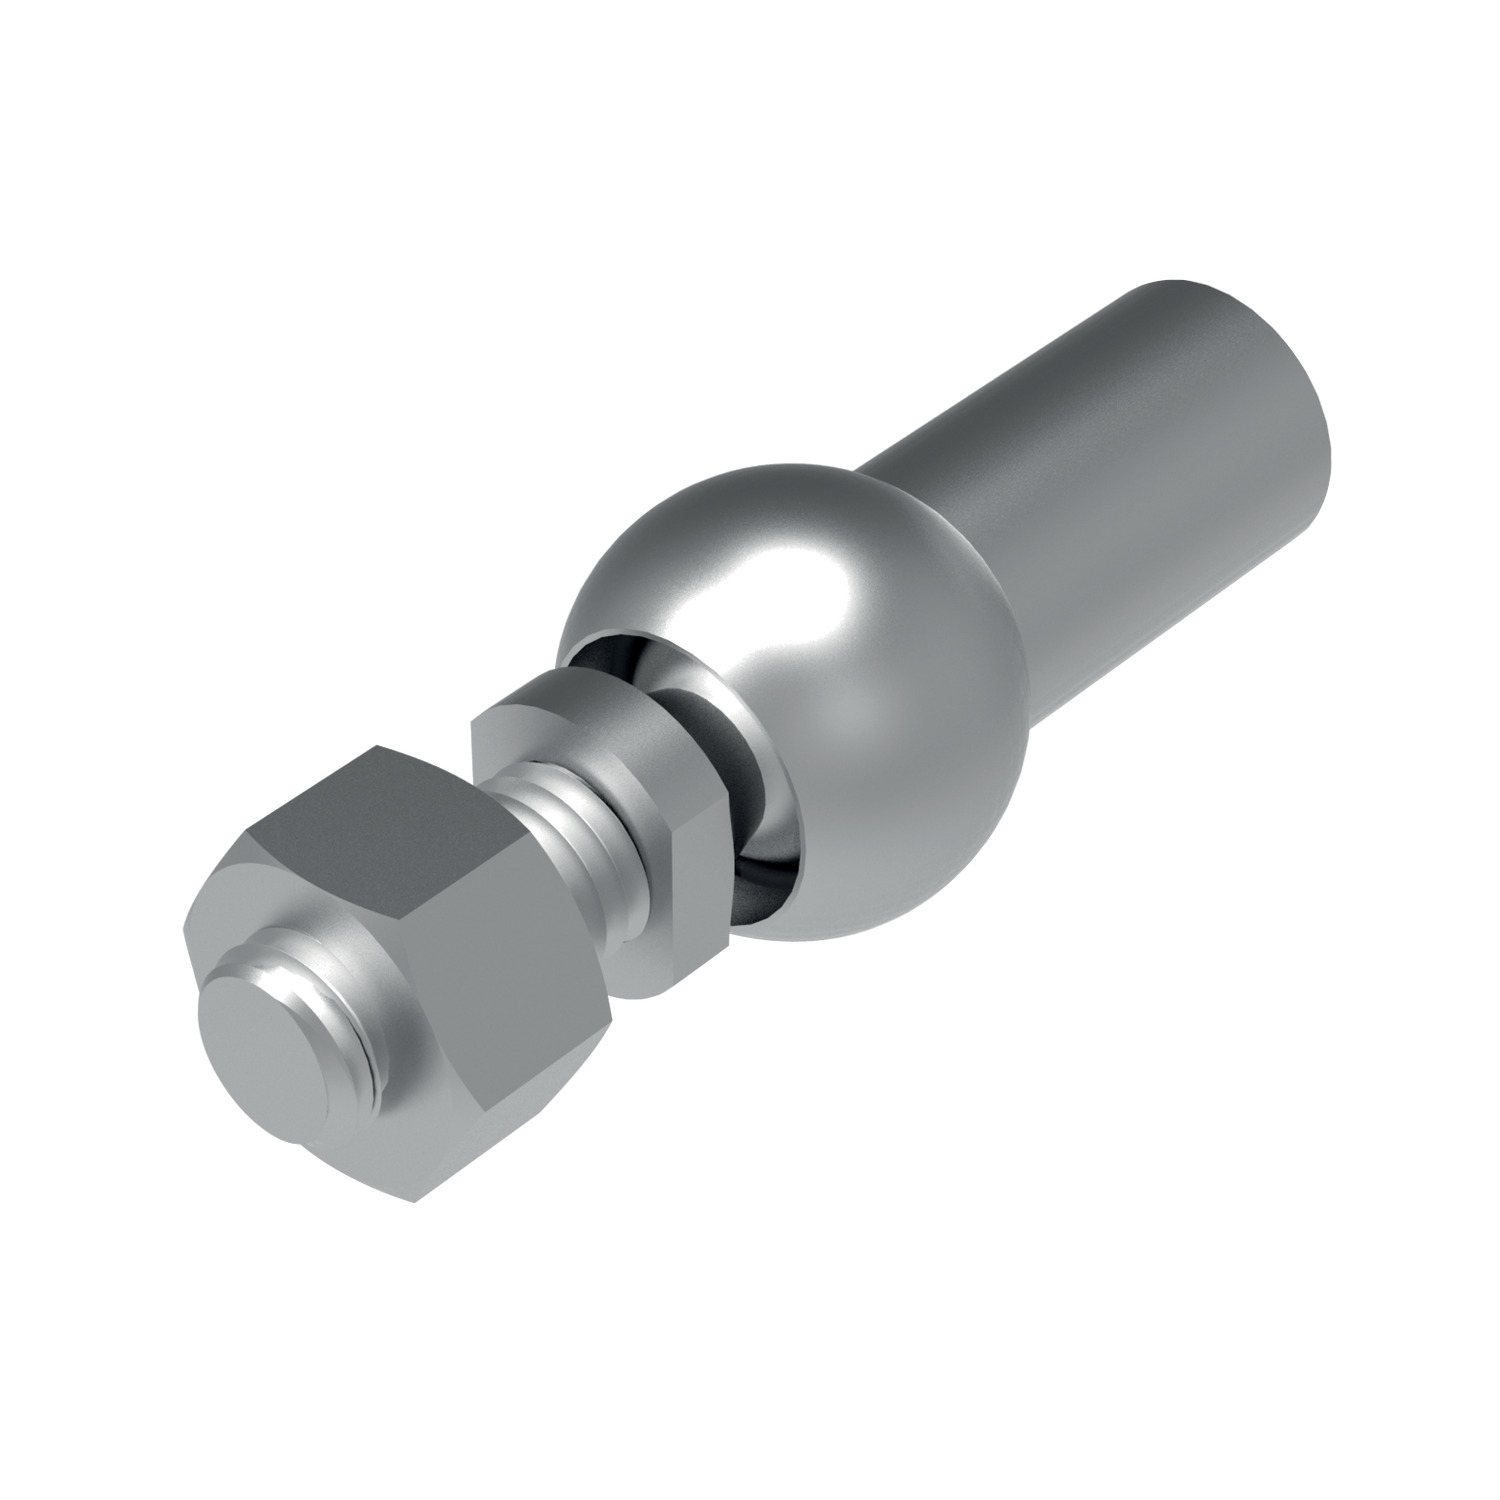 Product 65520, Axial Ball and Socket Joints  / 